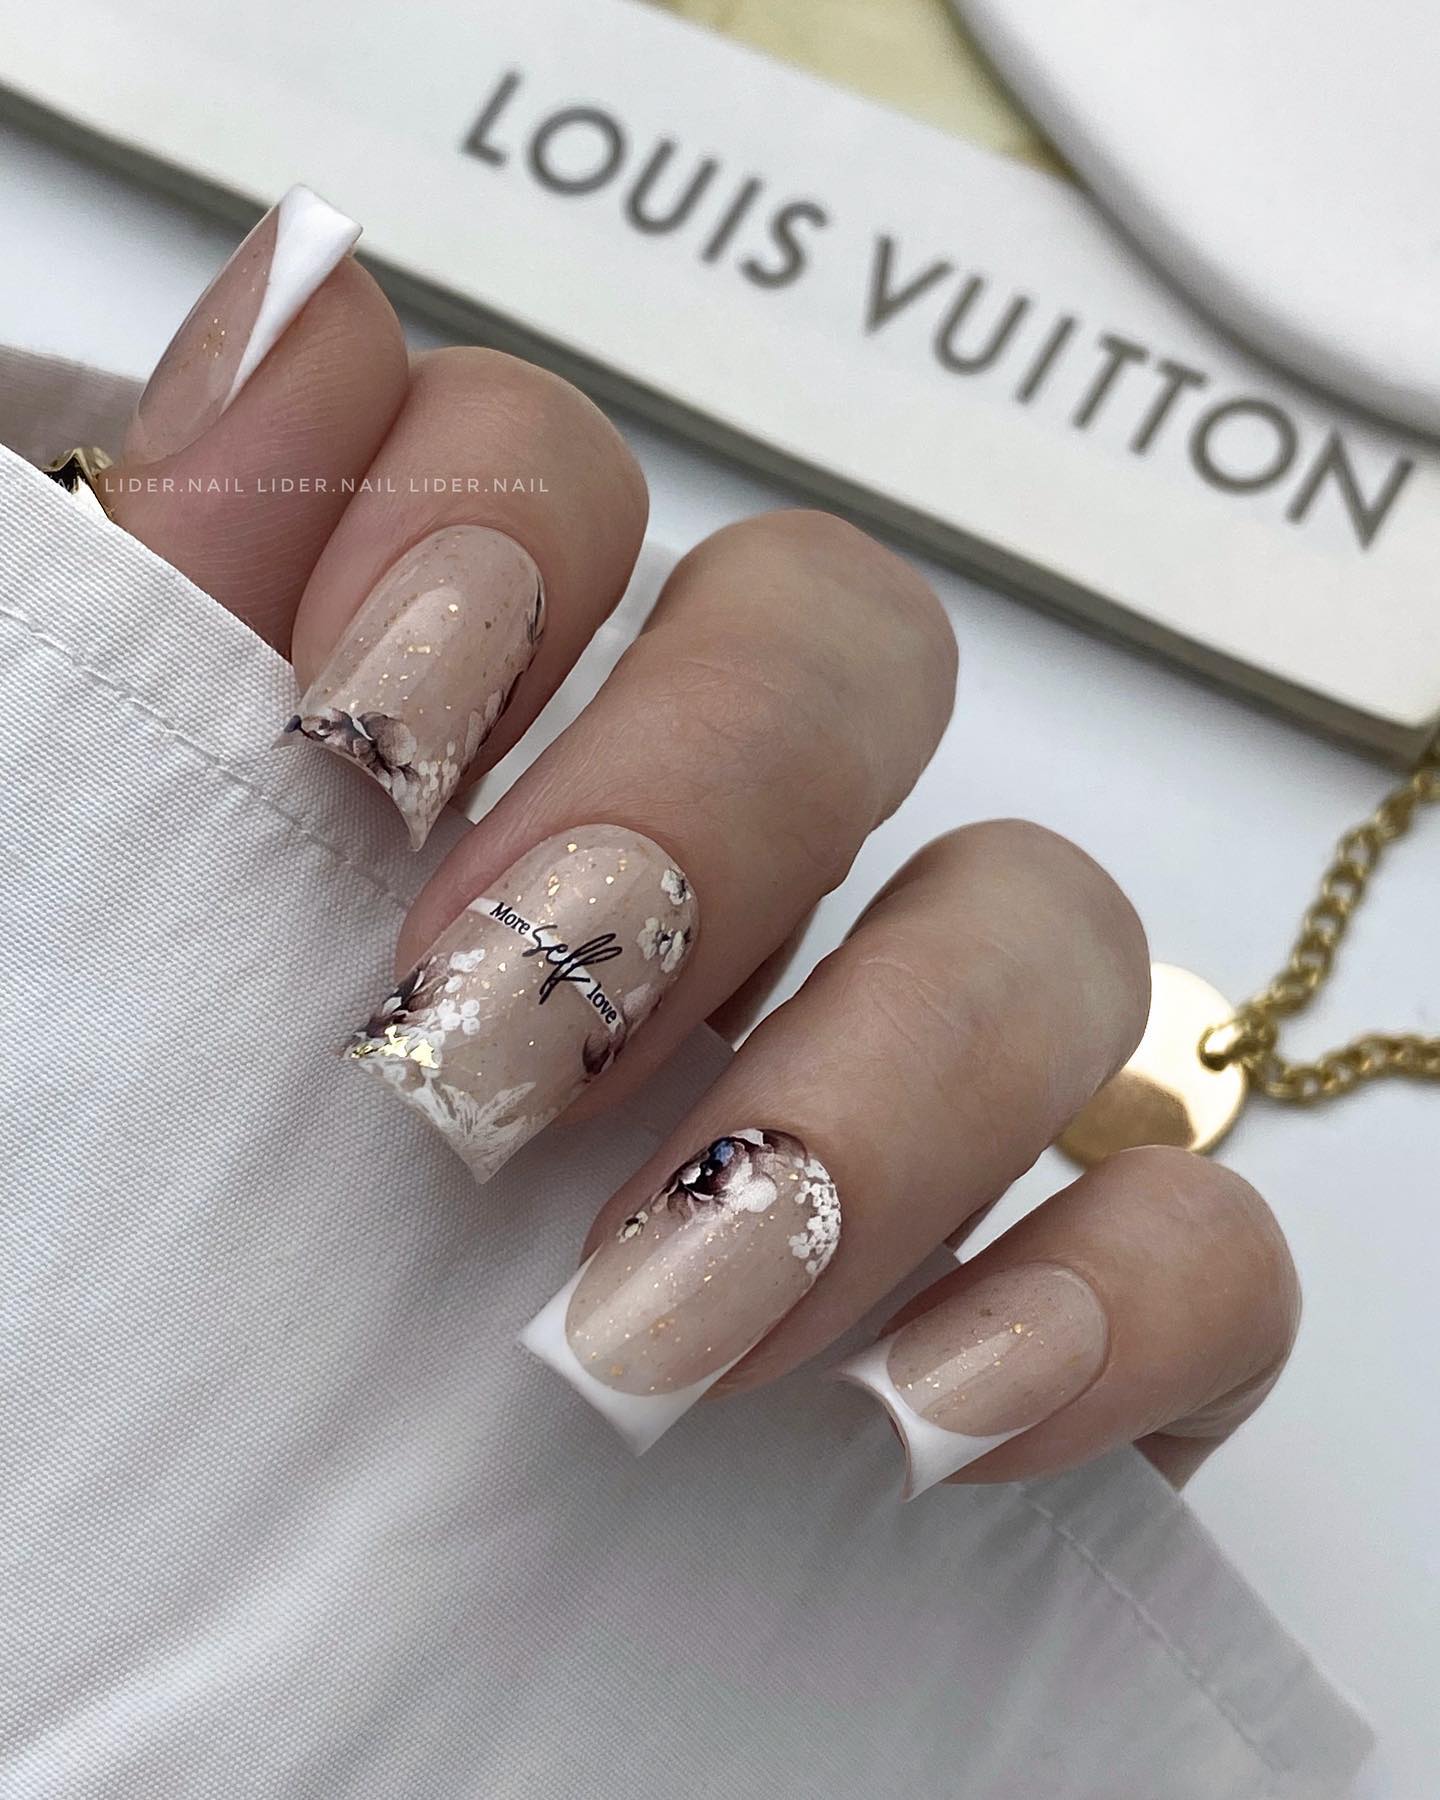 Square Light Brown Nails with White Tips